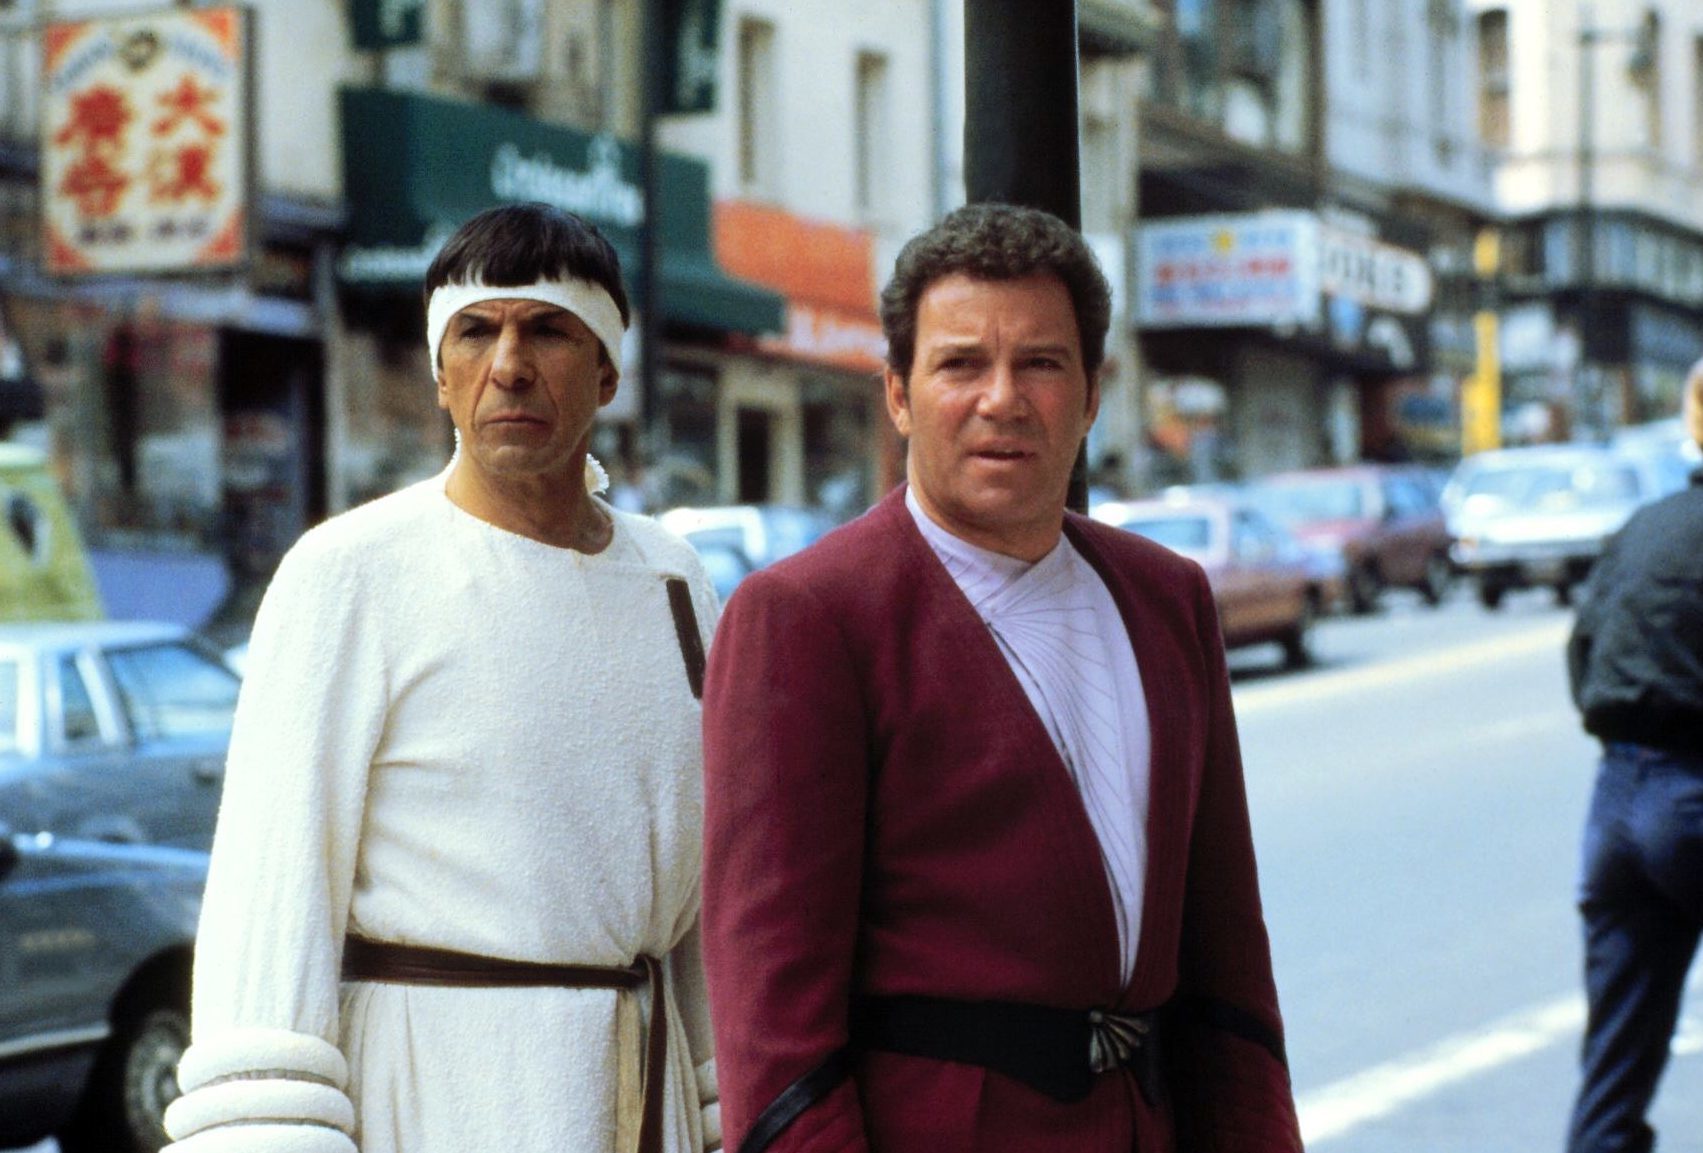 Leonard Nimoy and William Shatner as iconic duo Spock and Kirk in Star Trek IV: The Voyage Home.